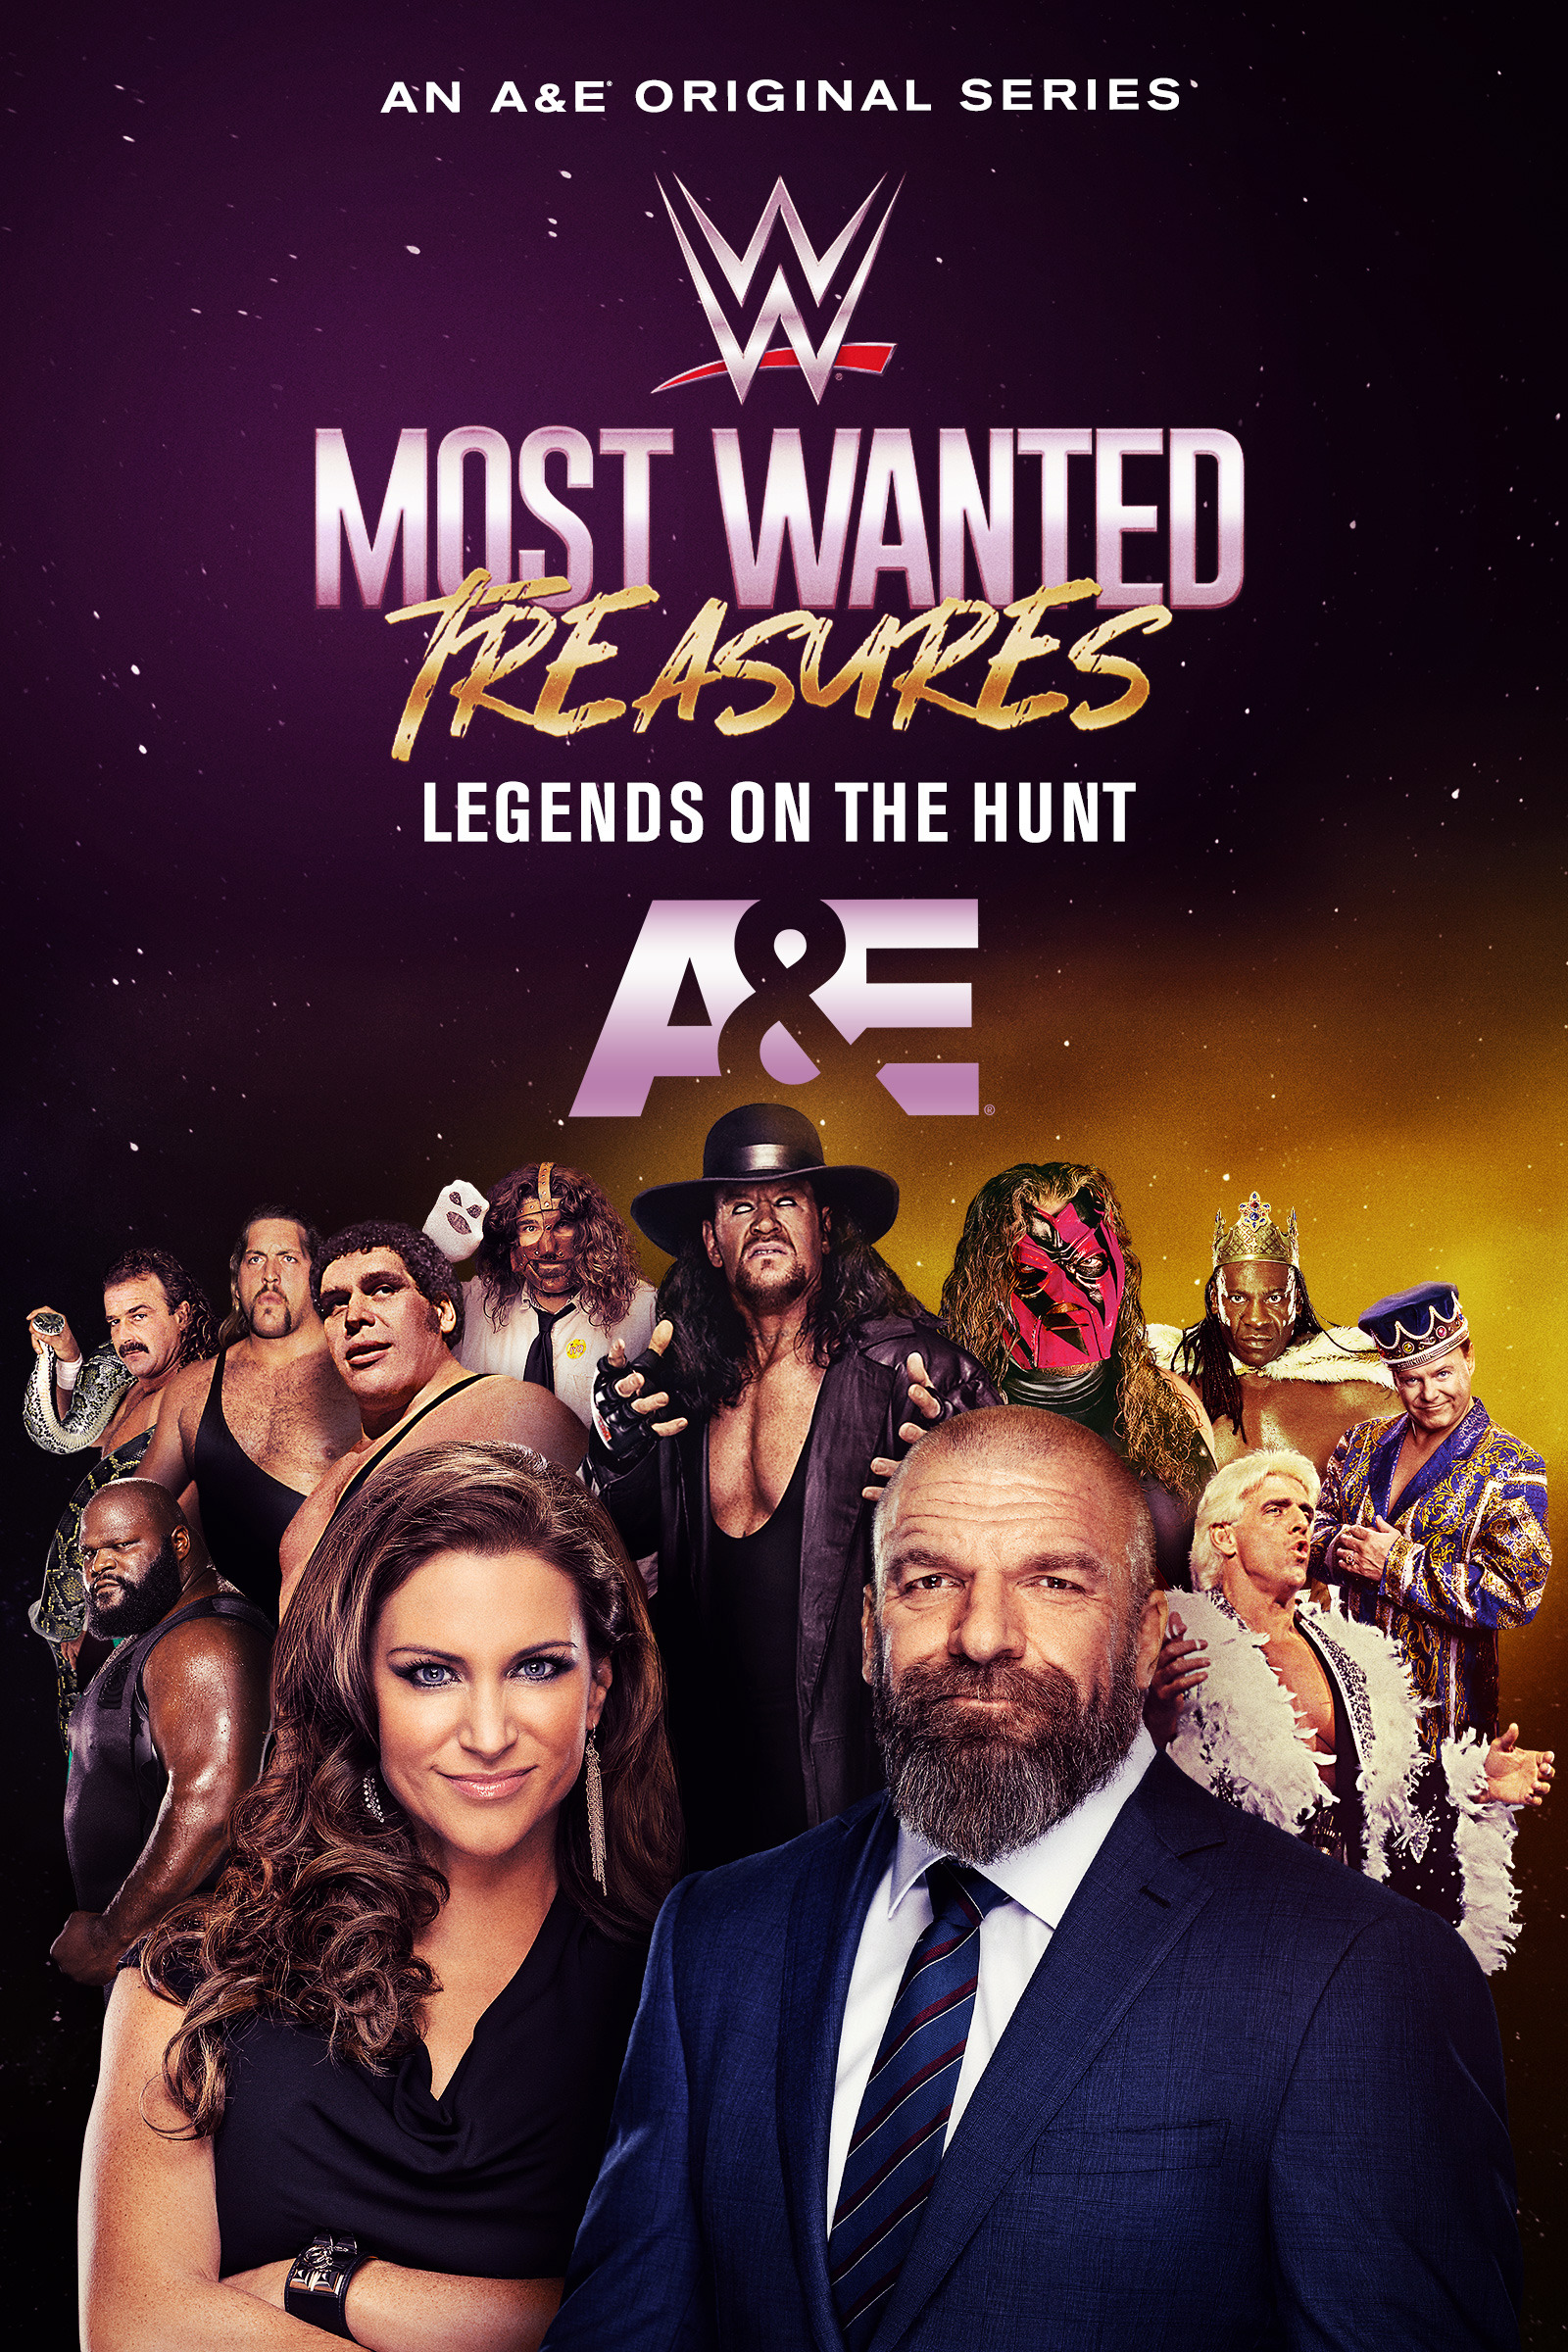 Mega Sized TV Poster Image for WWE's Most Wanted Treasures 